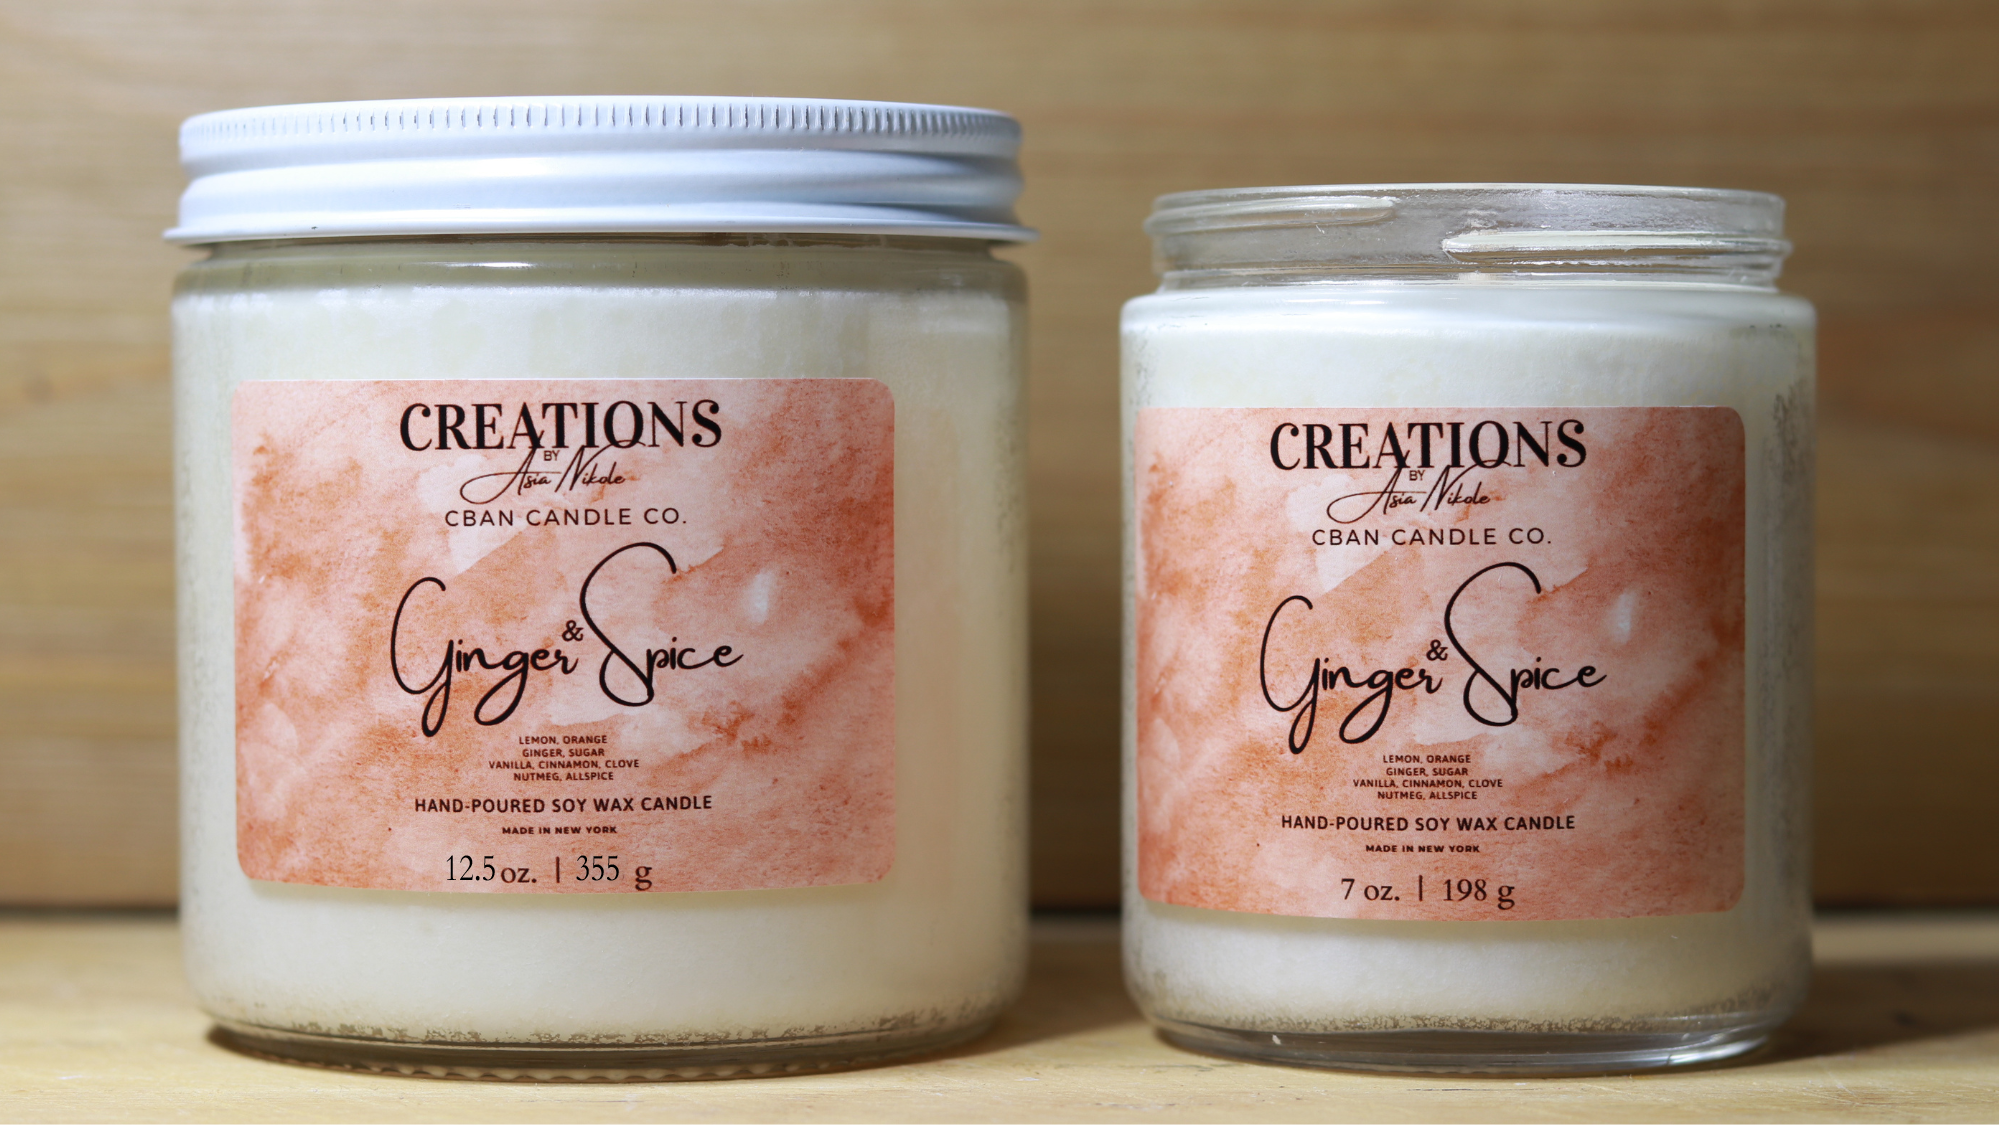 Ginger & Spice - Soy Wax Candle